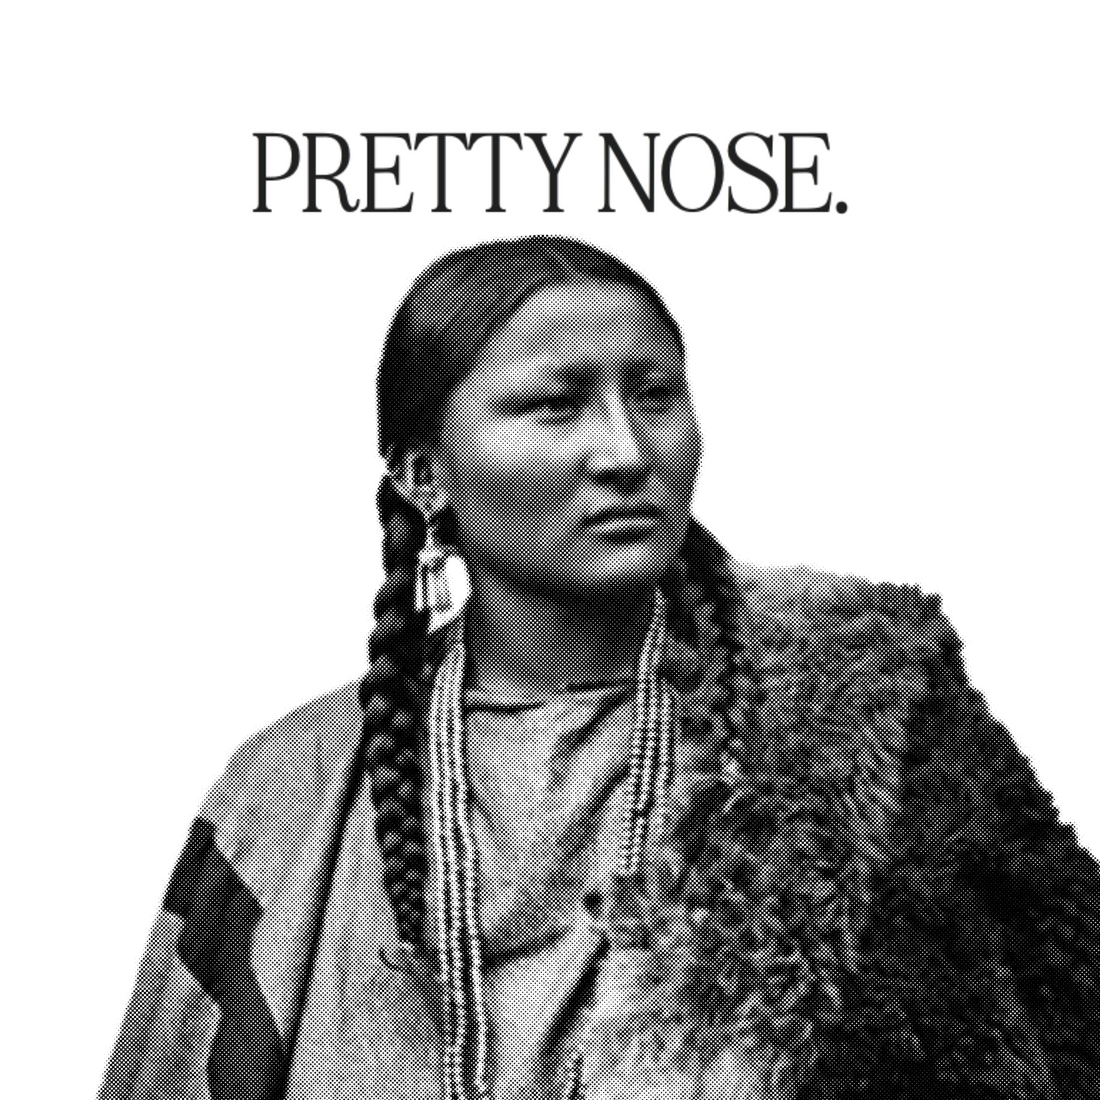 Who is Pretty Nose?